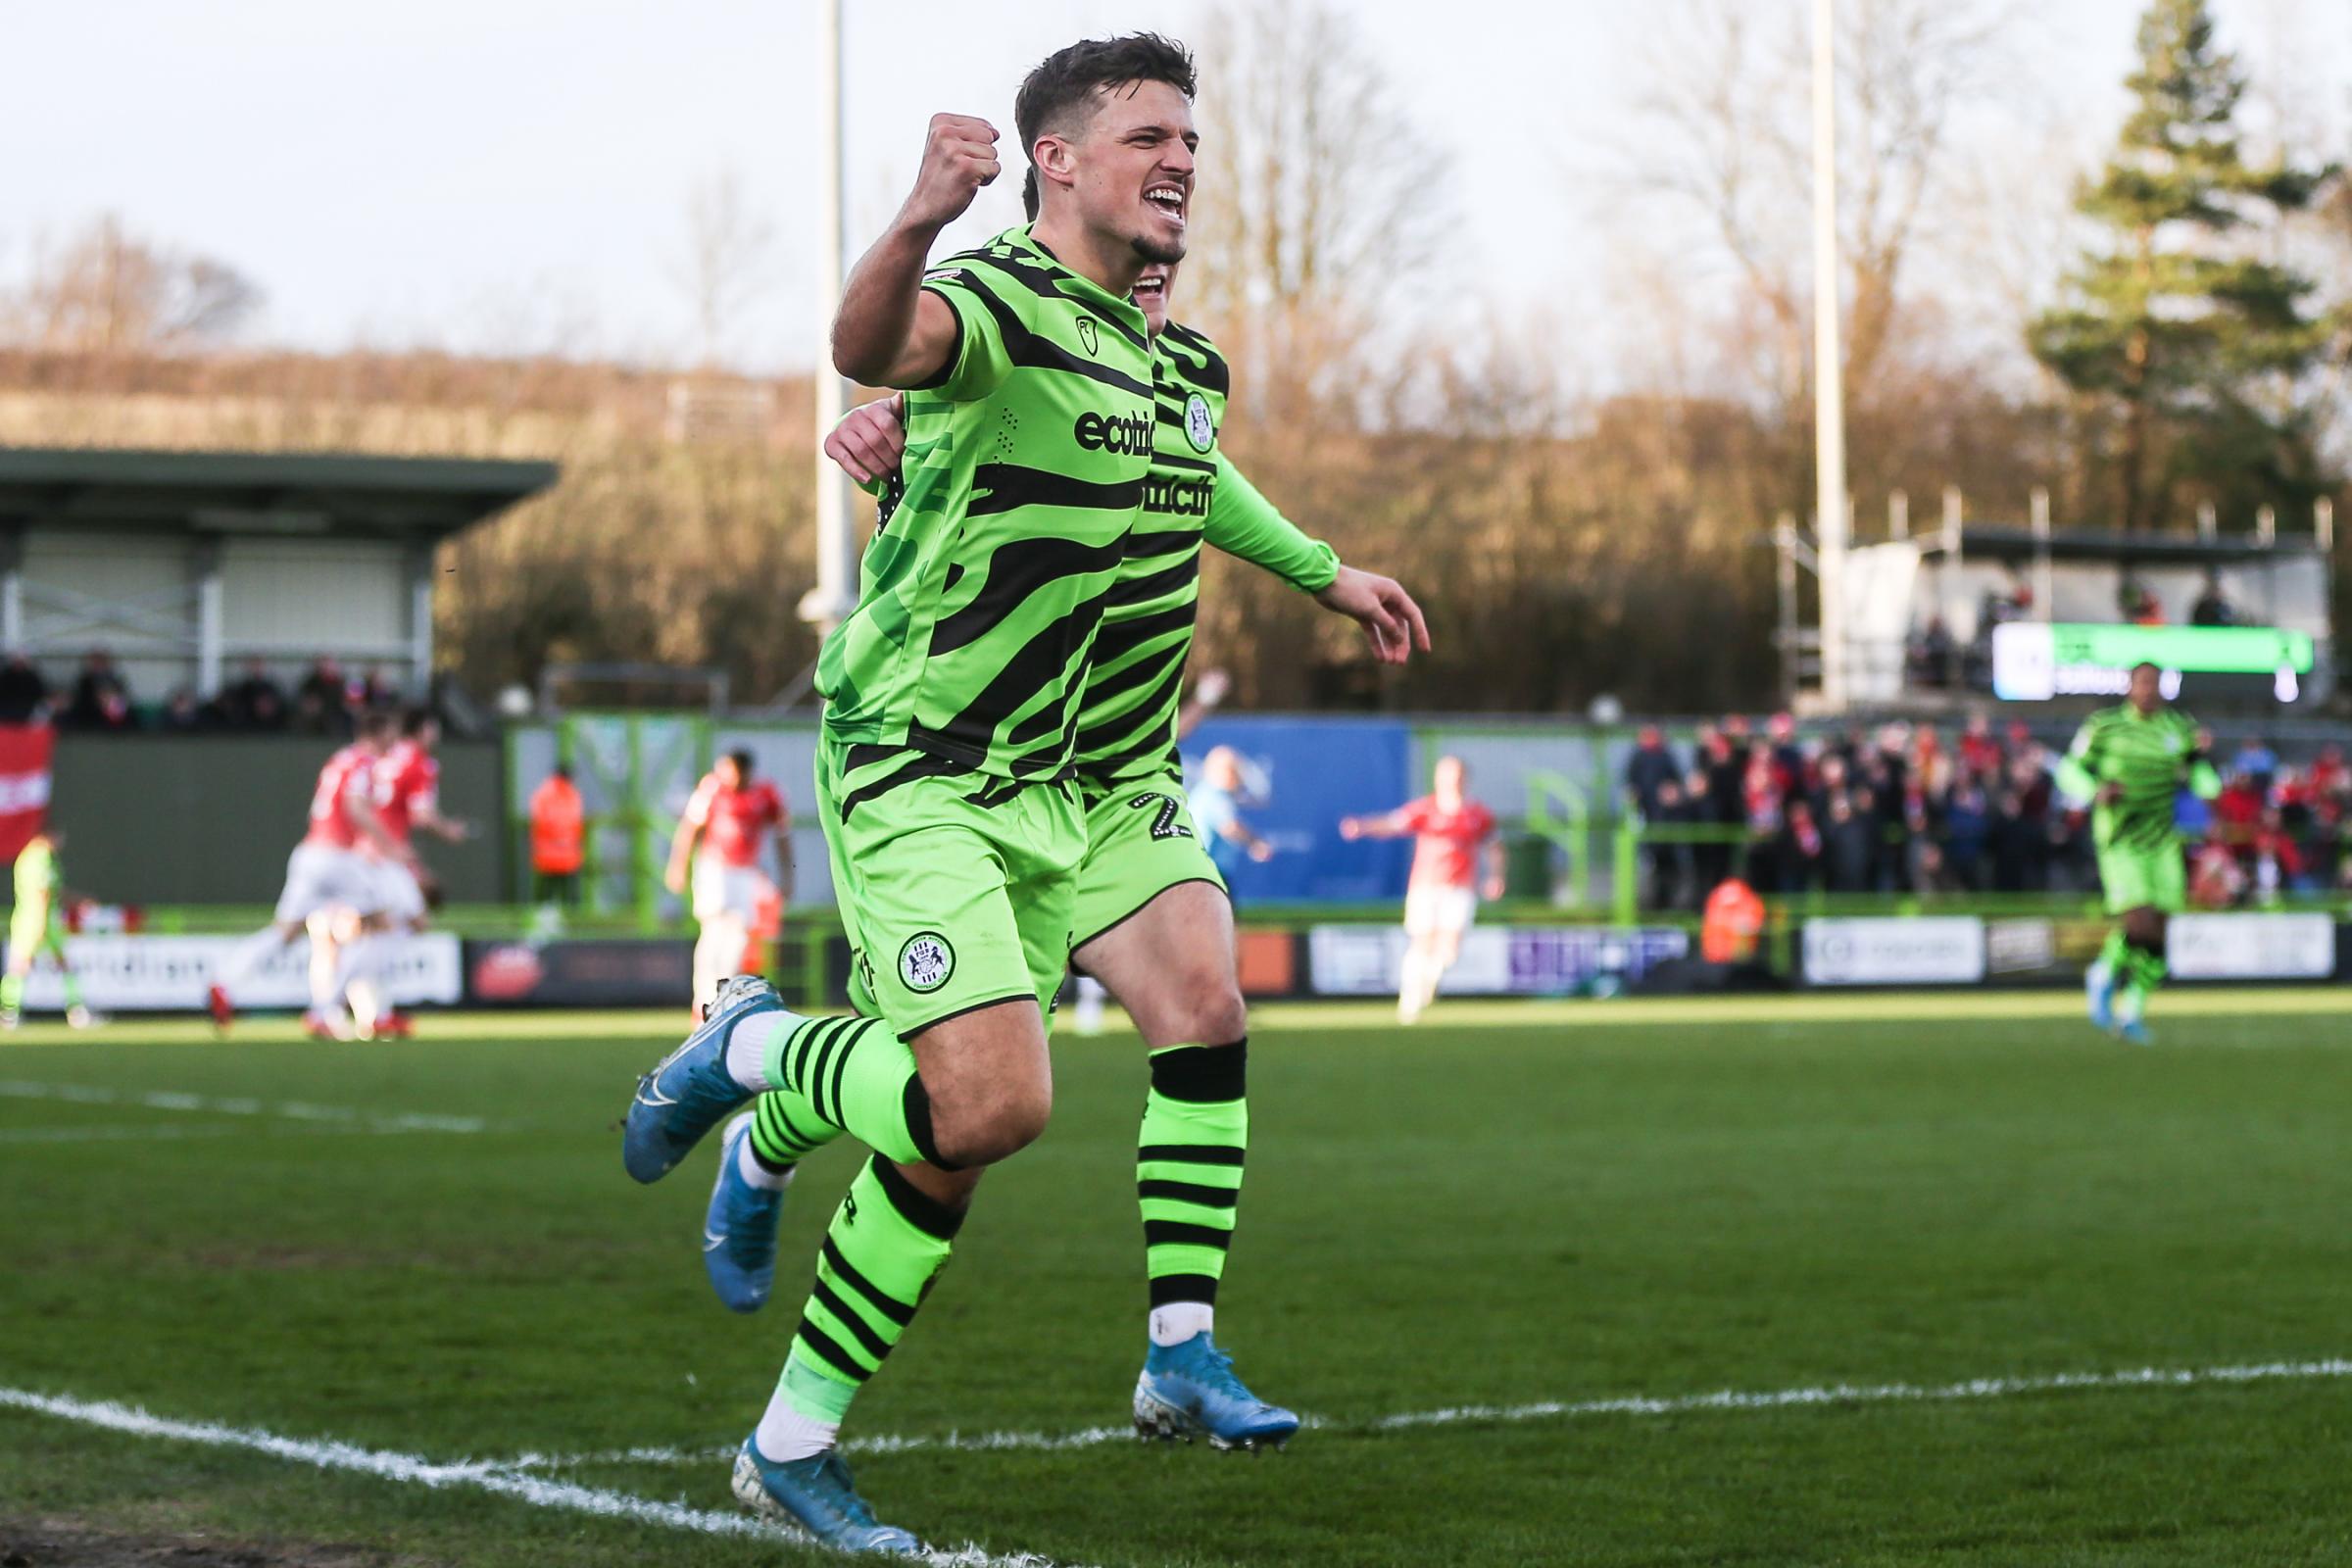 Forest Green Rovers 1 Salford City 2: Rovers drop out of play-offs | Stroud News and Journal